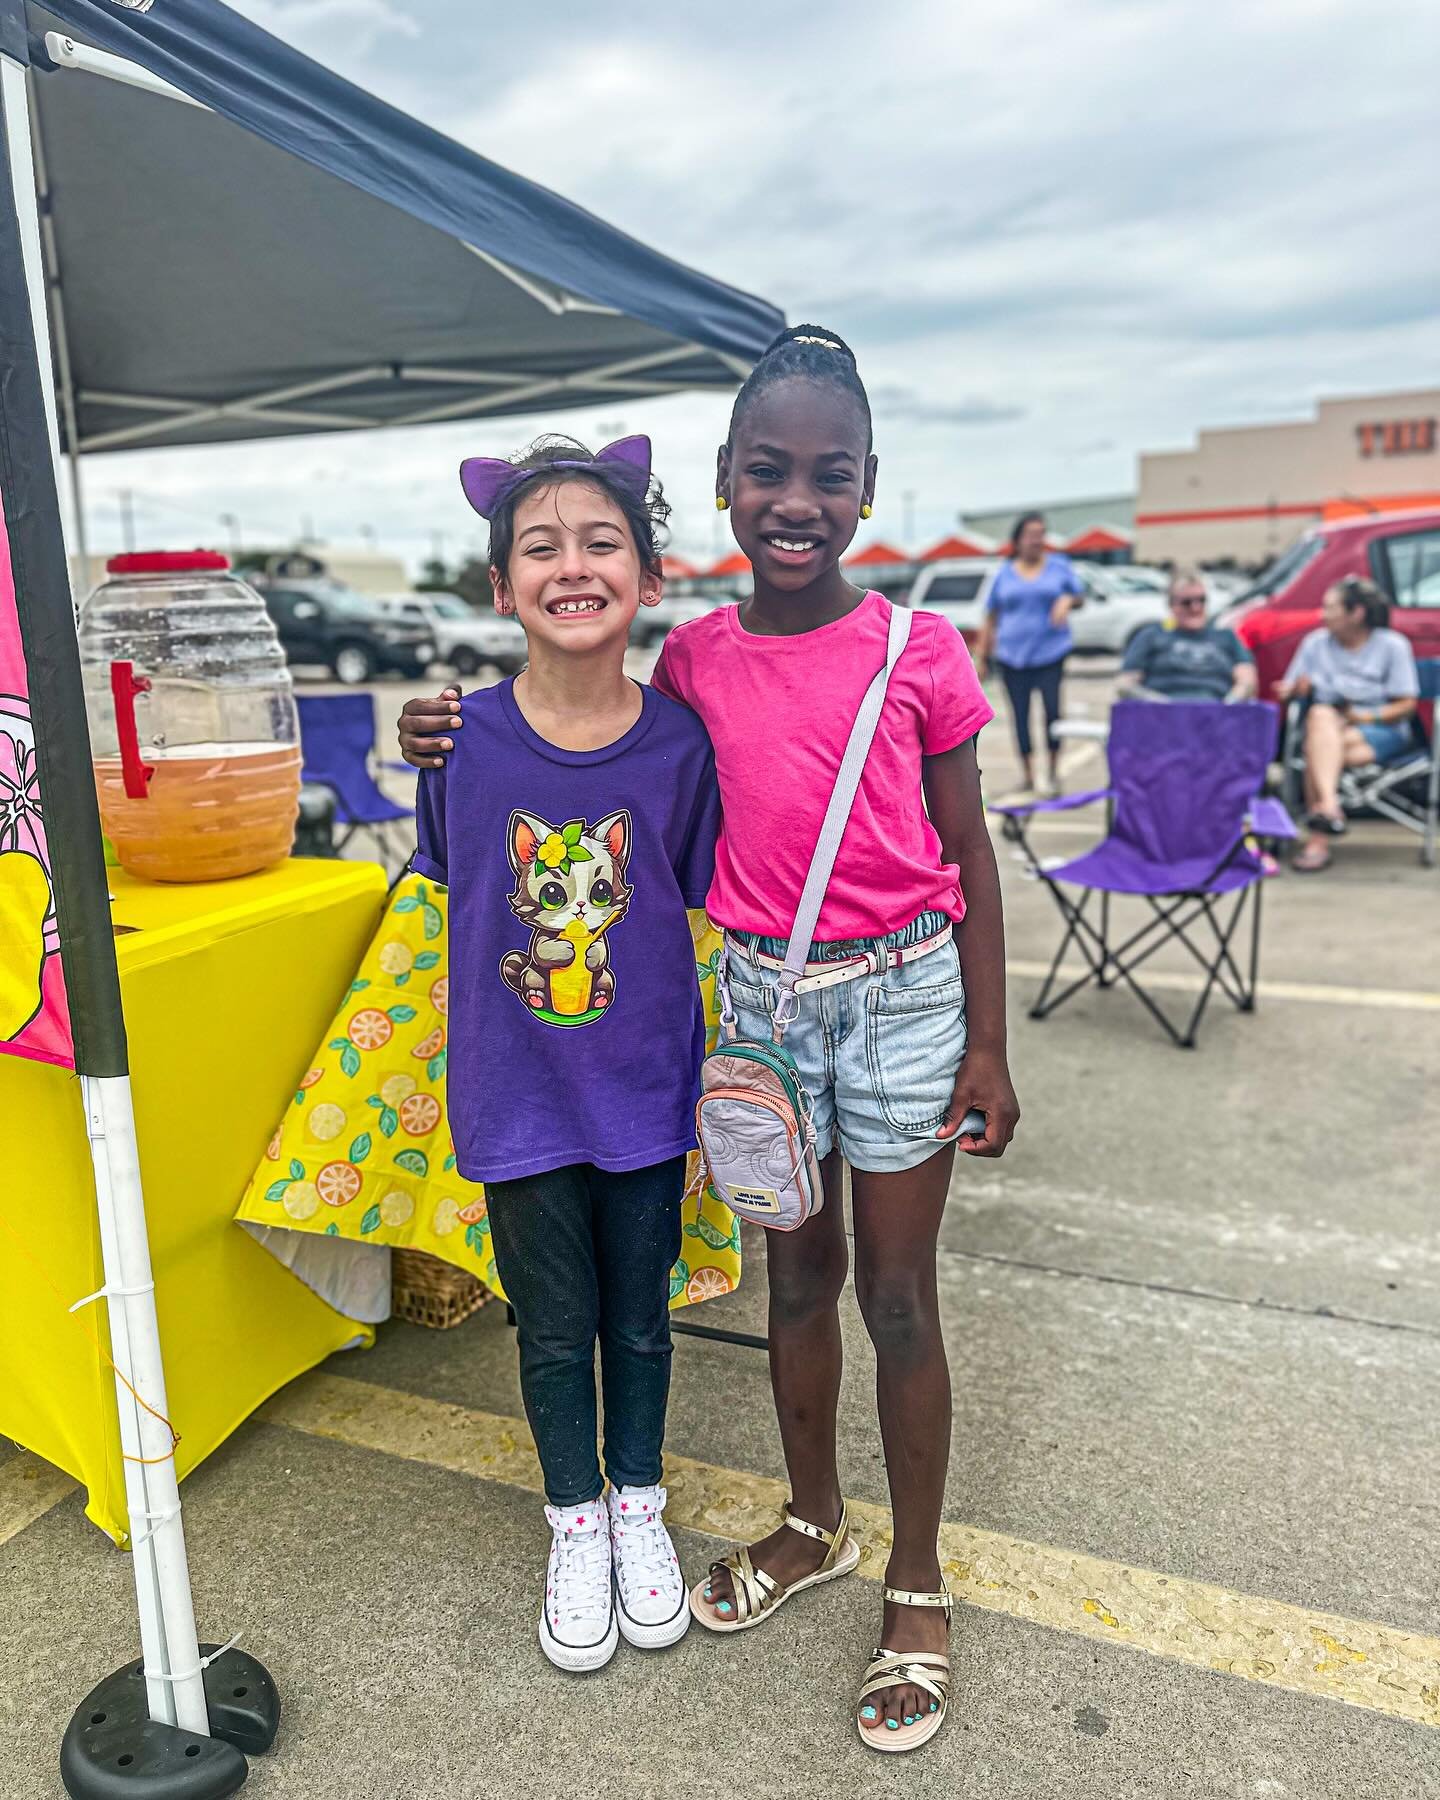 We aren&rsquo;t letting a few clouds ☁️ rain on our Lemonade Day Parade! 🍋 I stopped by to support Harlee &amp; Mia at their stands. Great job out there, ladies! 💛
.
.
.
#lemonadeday #youthentrepreneur #lemonadestand #girlboss